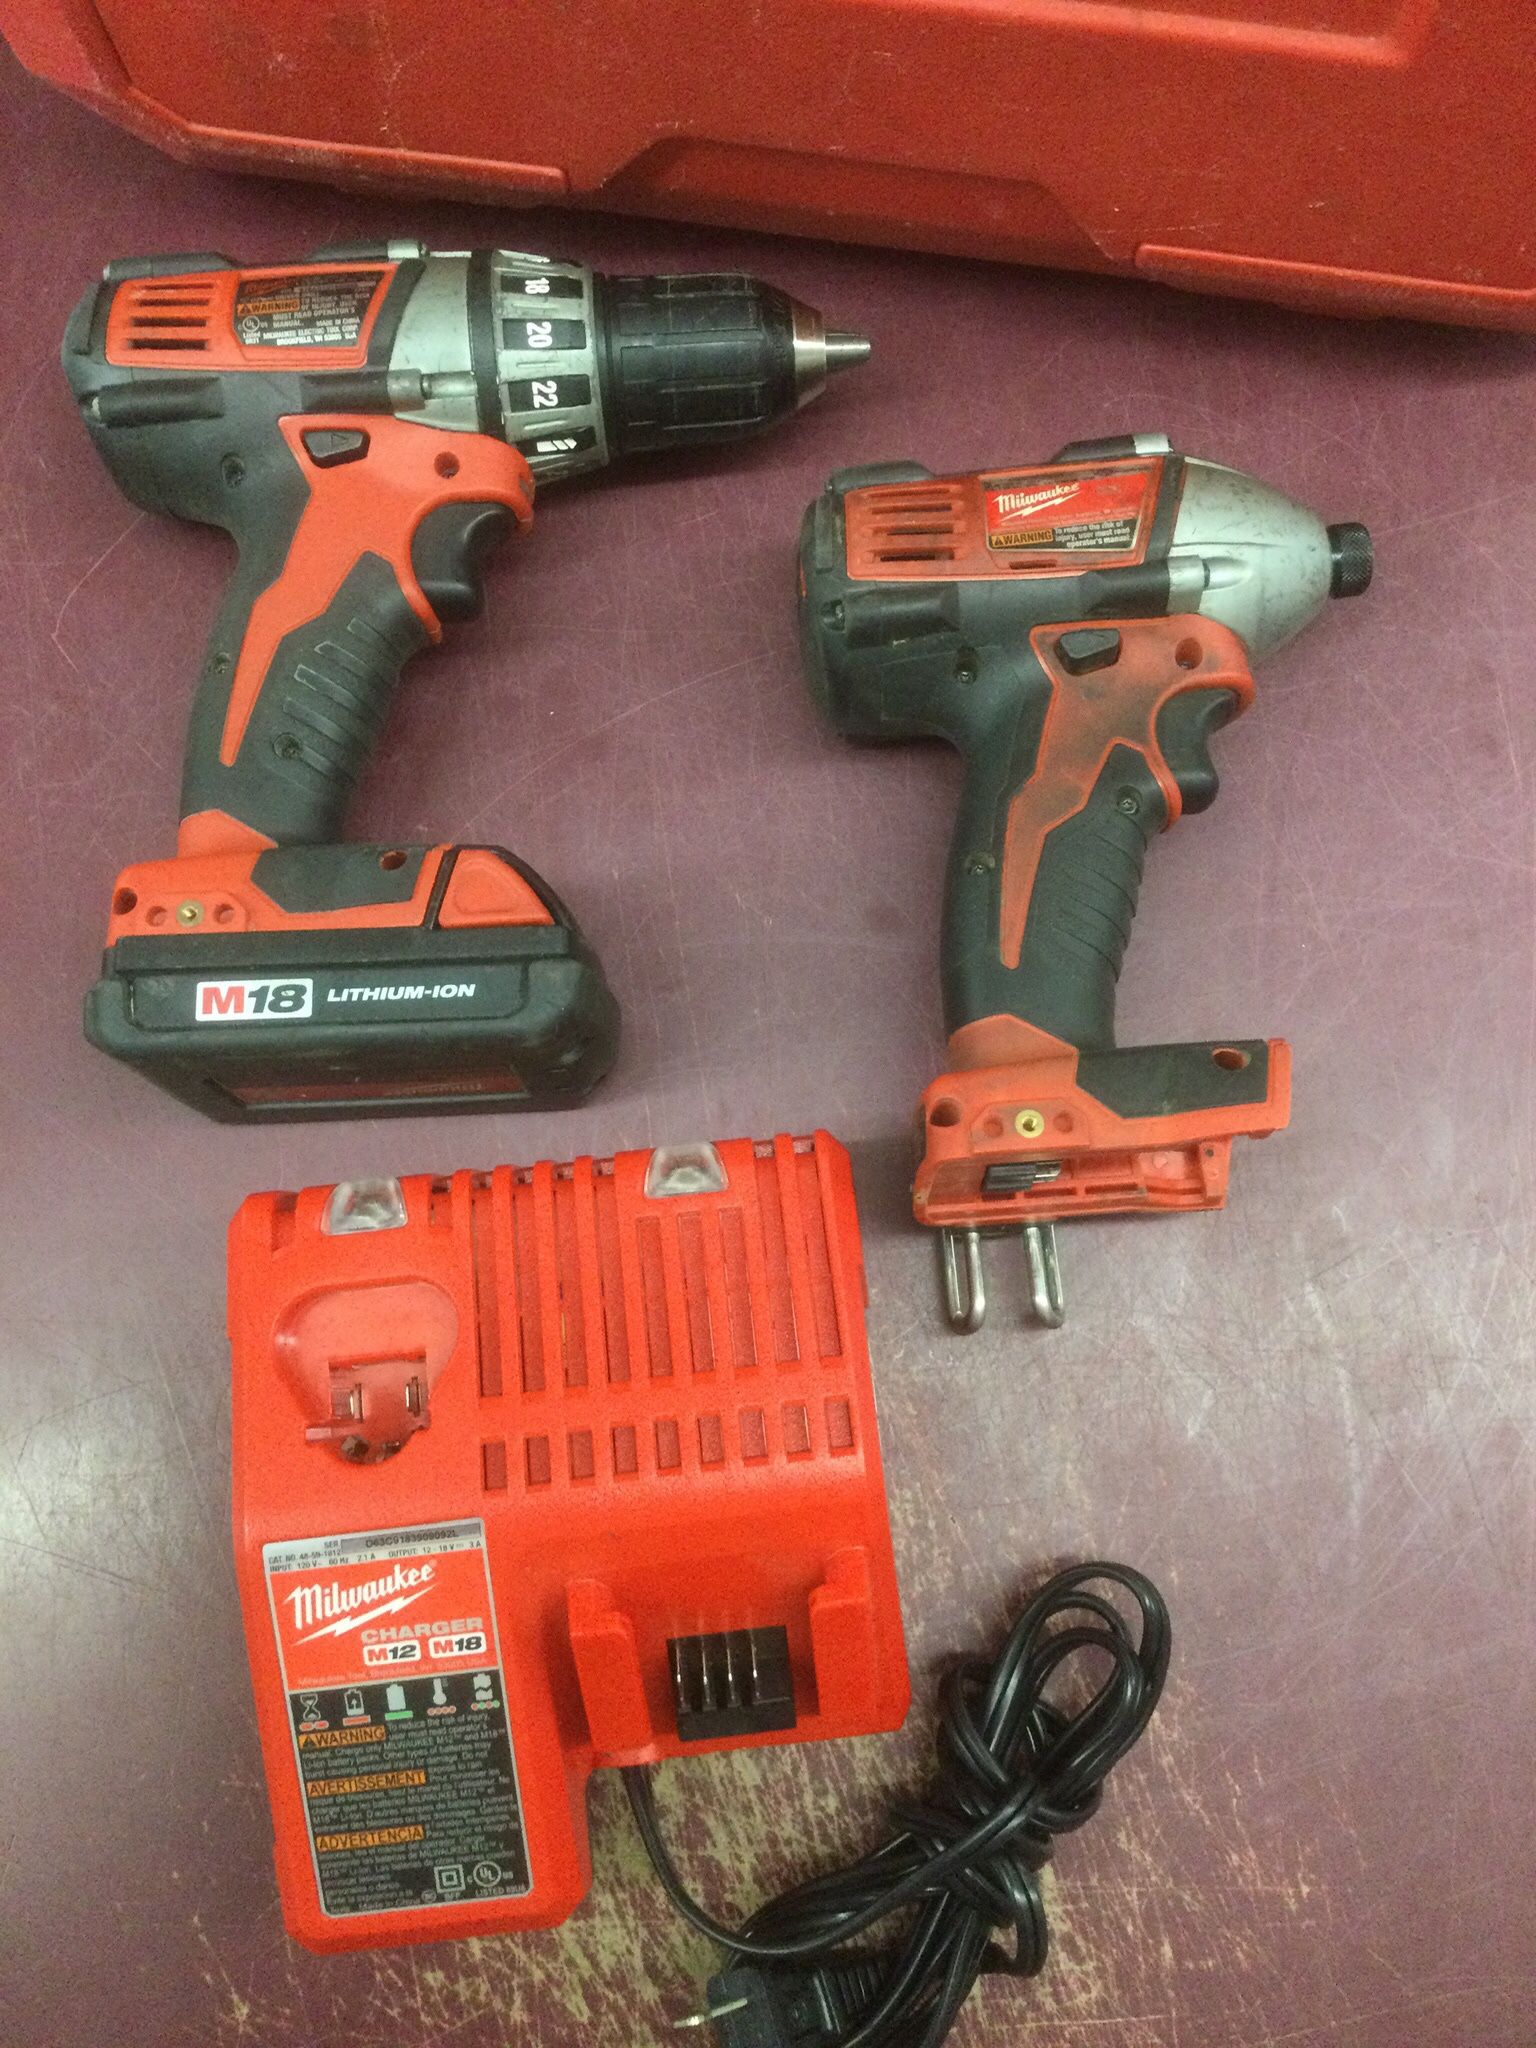 MILWAUKEE M18 CORDLESS KIT 1/4” HEX IMPACT DRIVER AND  1/2” DRILL DRIVER LITHIUM 18V